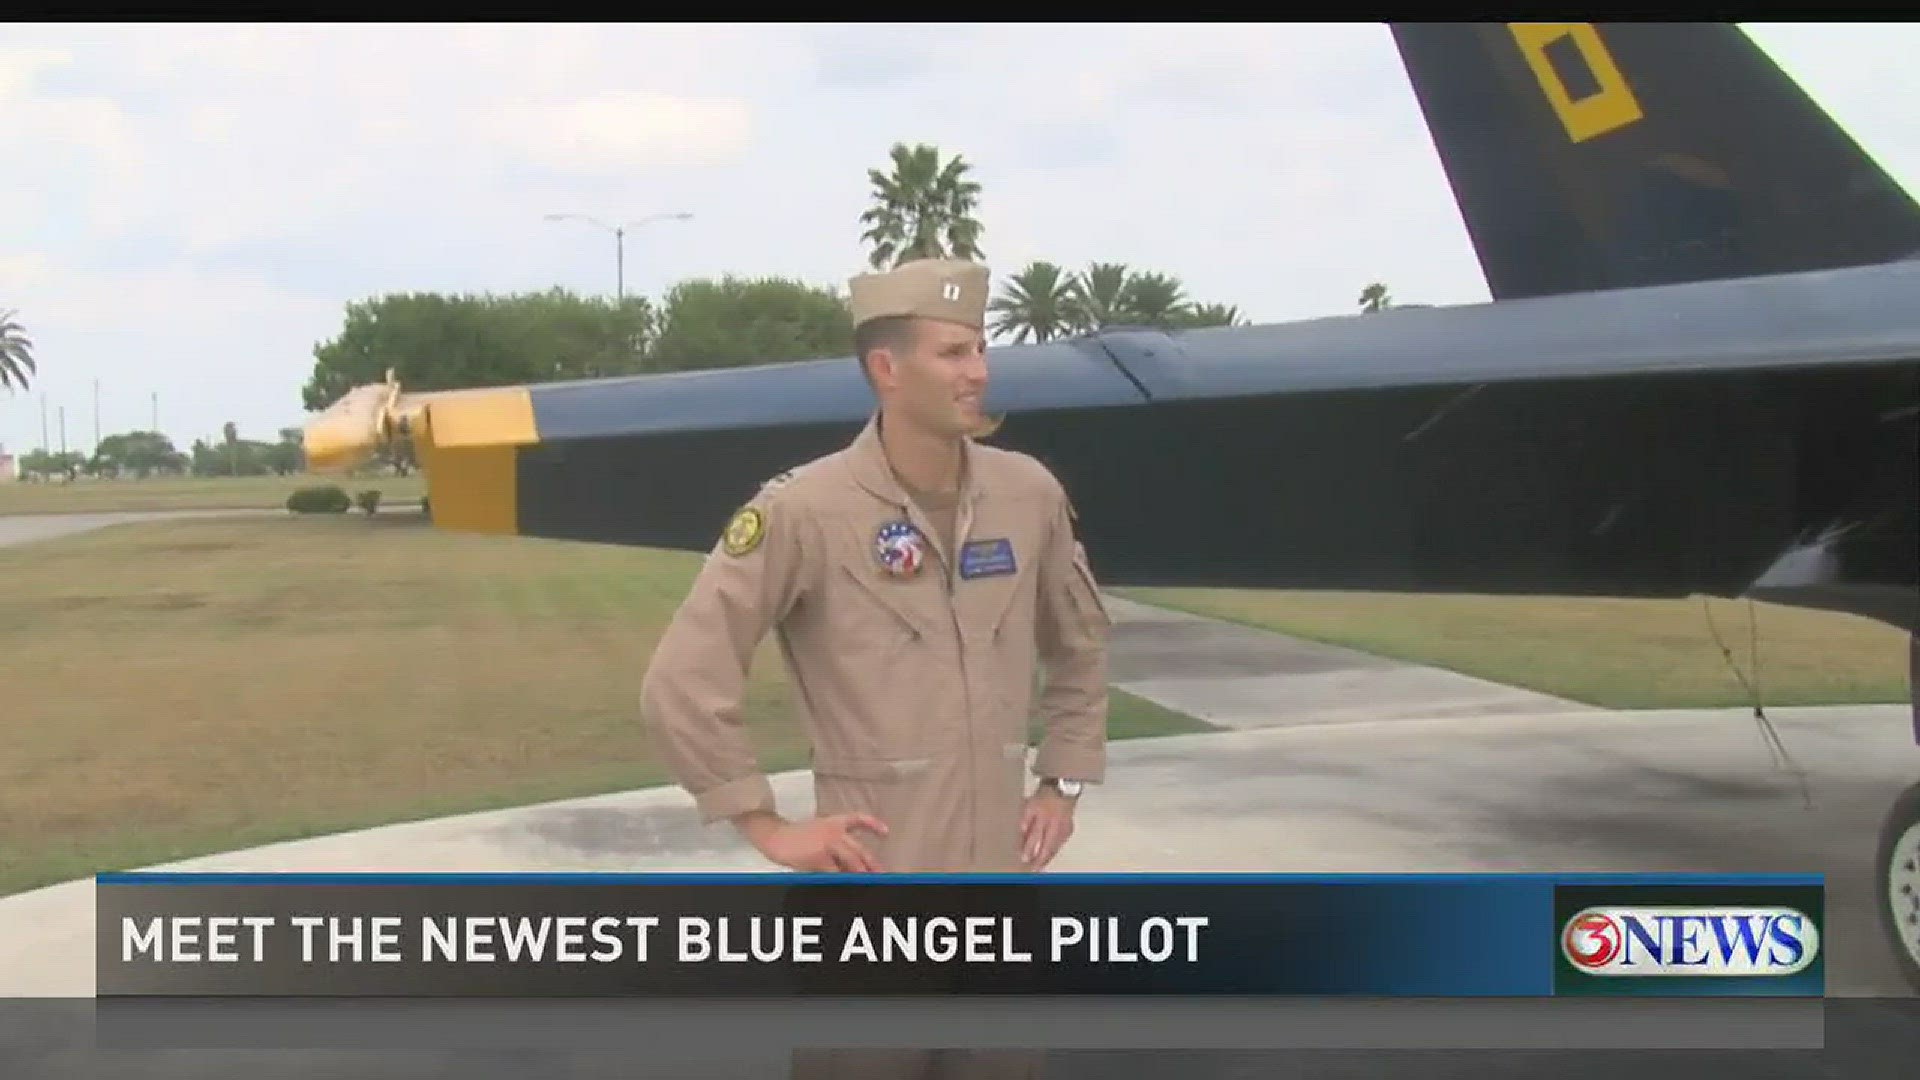 If you have had the chance to watch the Blue Angels put on one of their high-flying shows, you know it's a treat. They come to the local Wings Over South Texas Air Show each year, but now one of our own from South Texas will be joining the team.